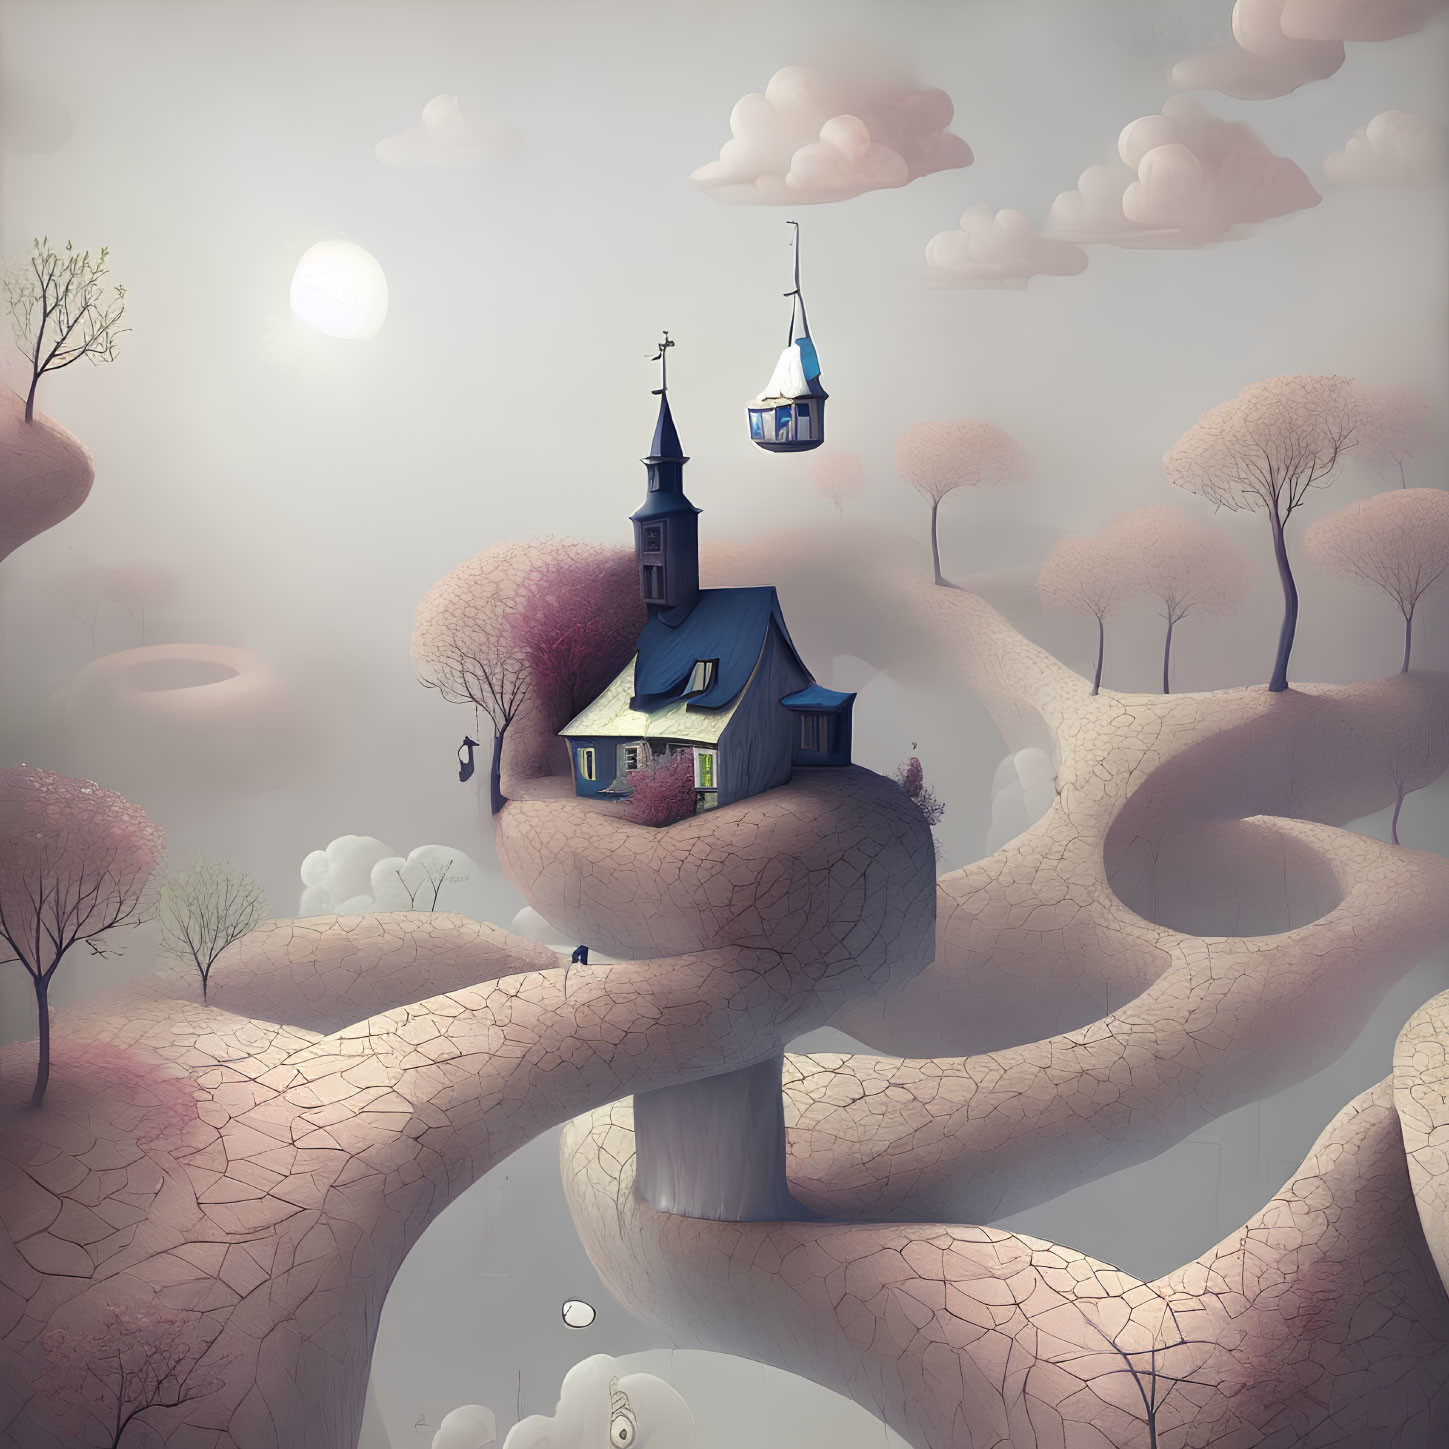 Surreal landscape featuring house, trees on giant fingers, gondola from cloud